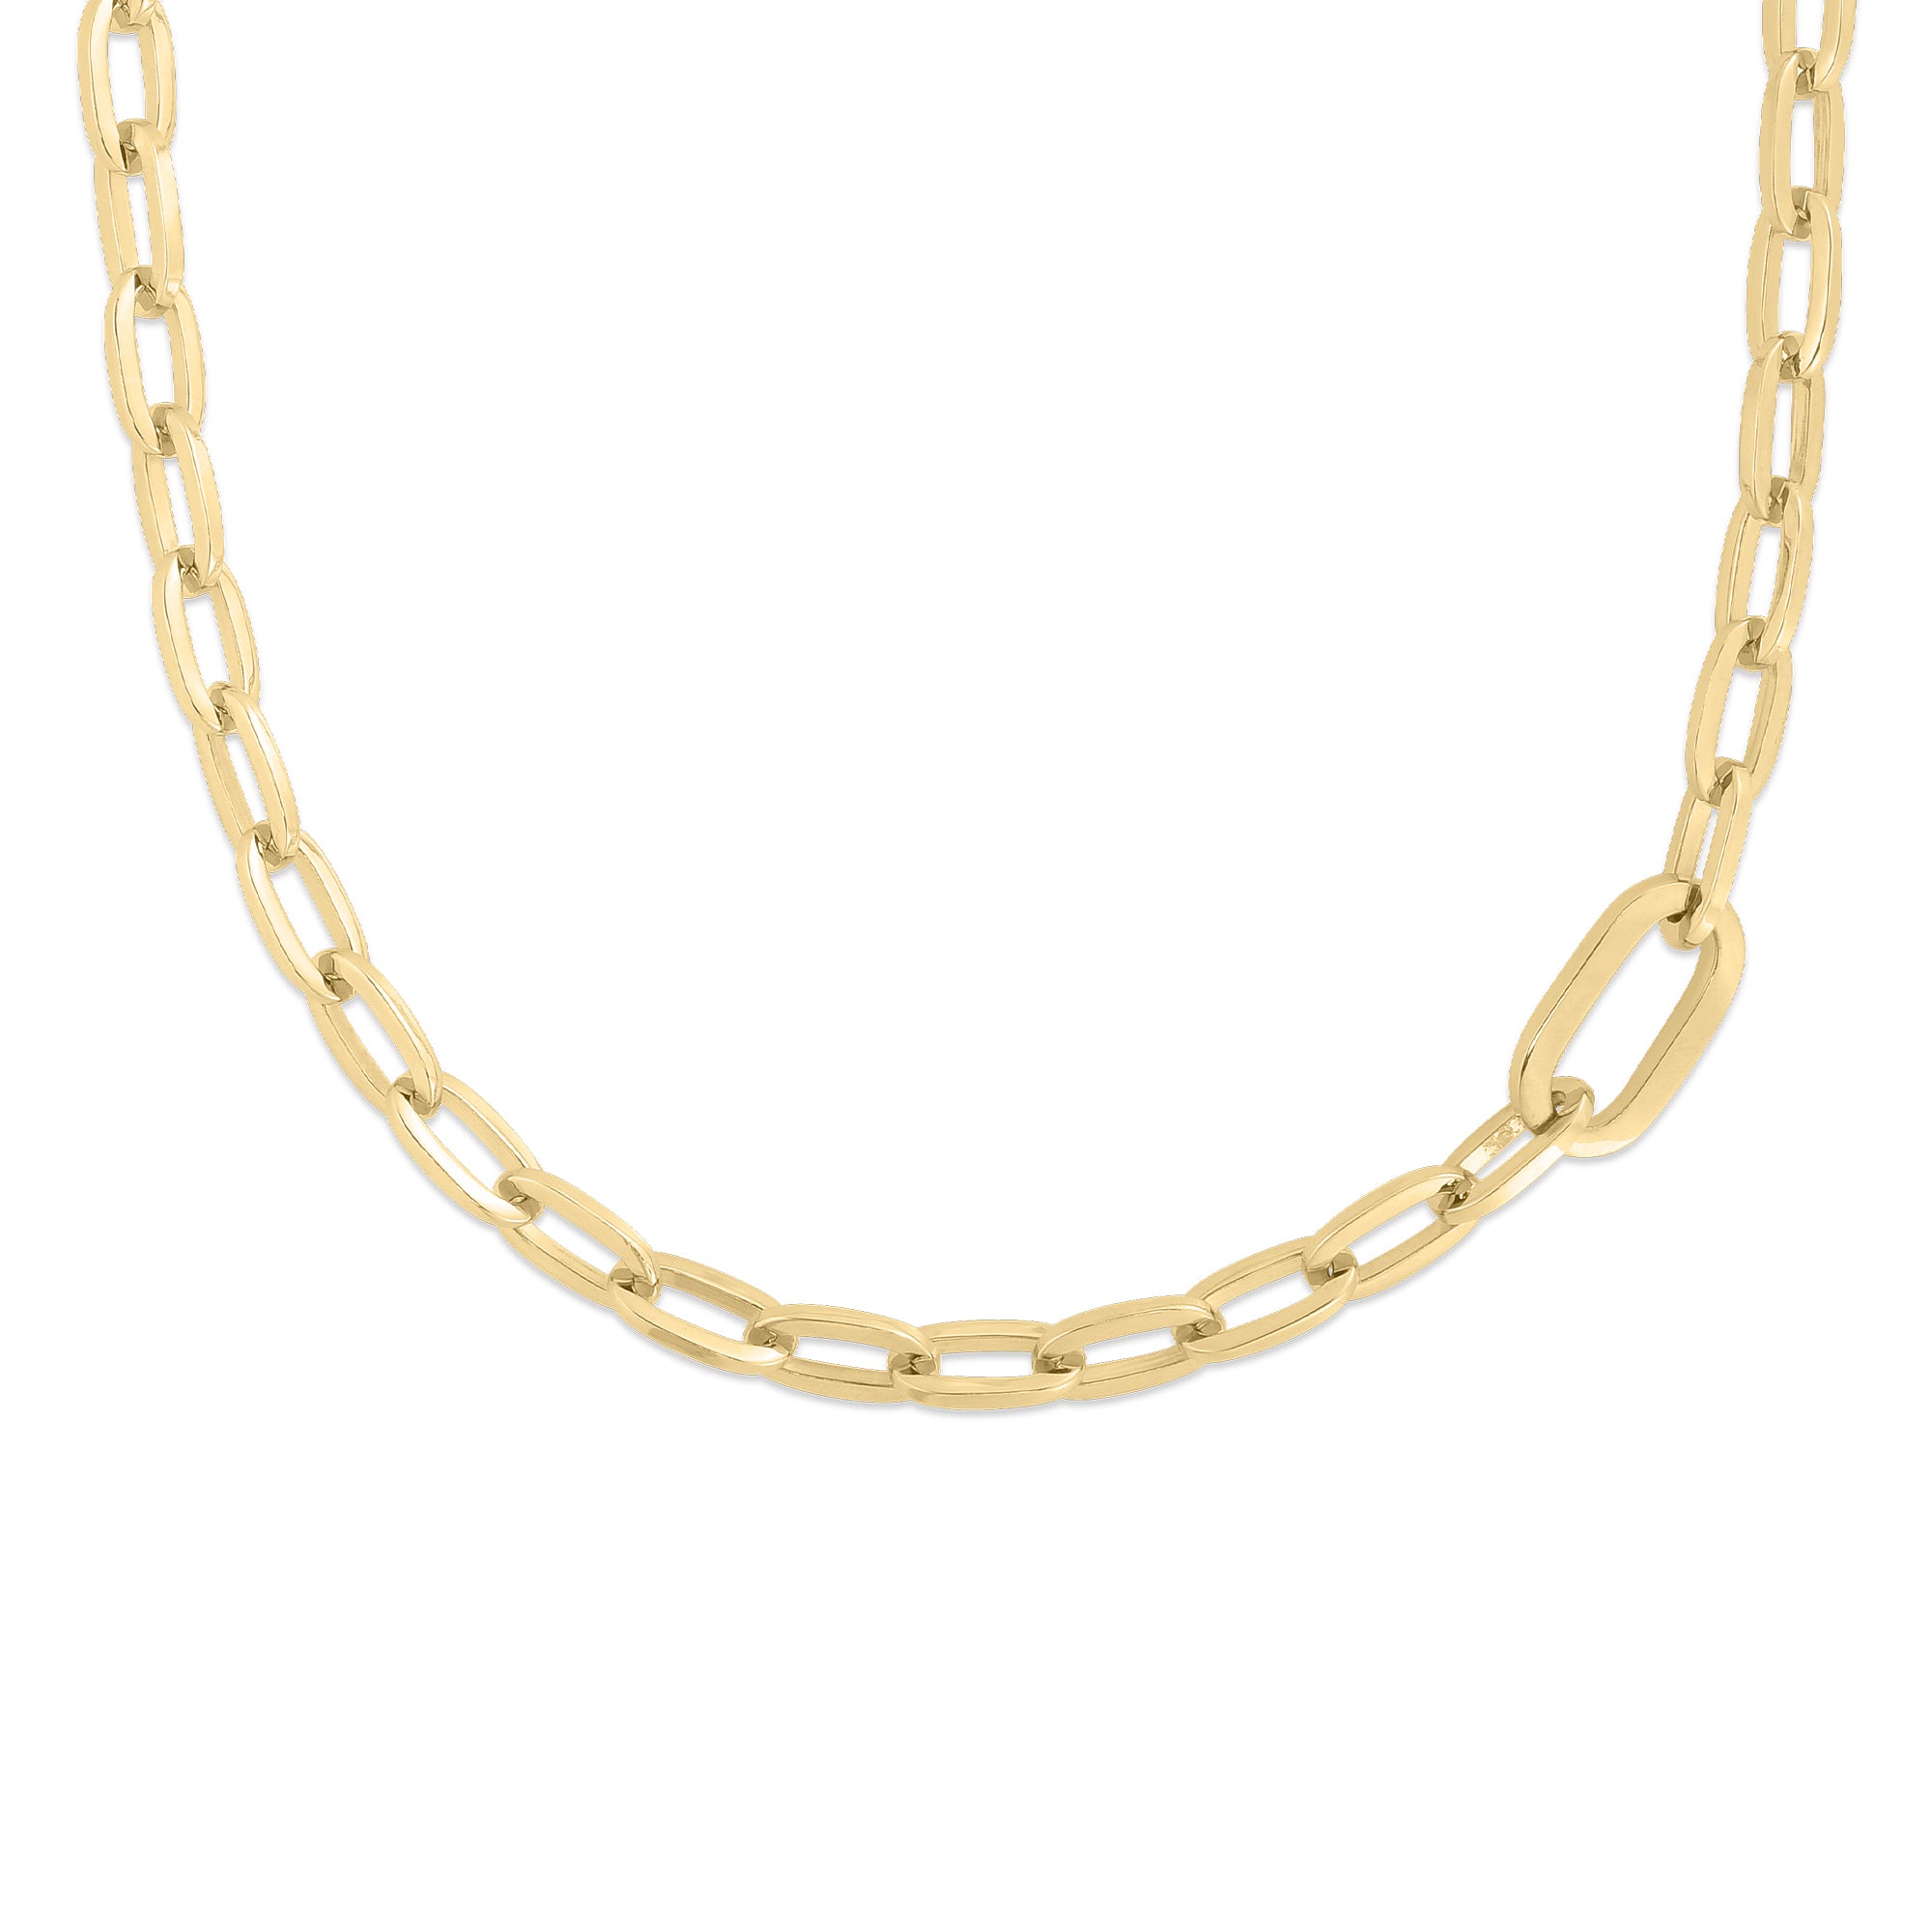 18K GOLD ALTERNATING SIZE LINK CHAIN NECKLACE